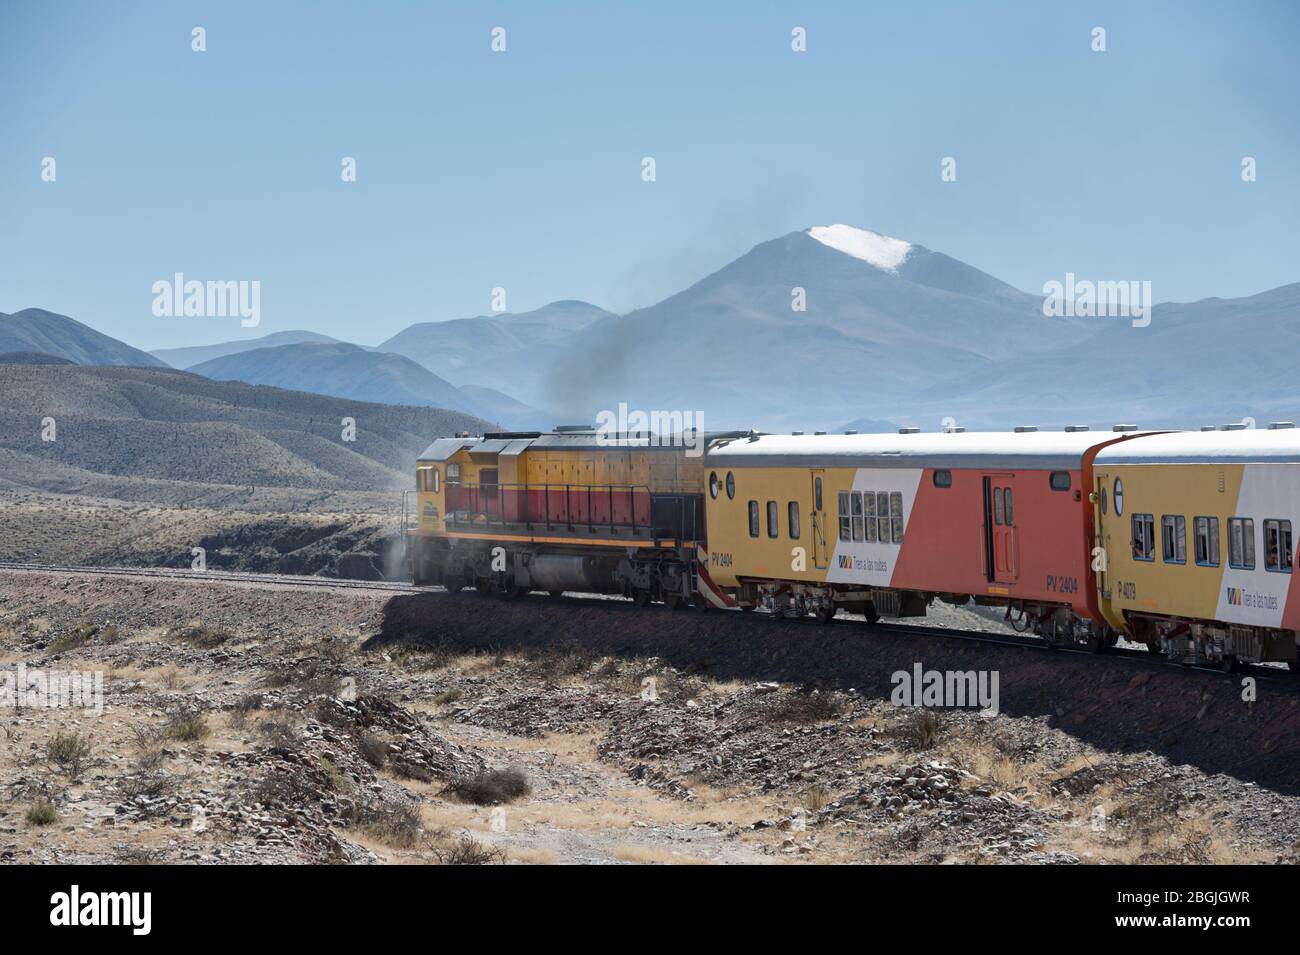 San Antonio de los Cobres, Salta, Argentina - August 31 2012: View of the locomotive and wagons of the tren a las nubes and the landscape of the high Stock Photo